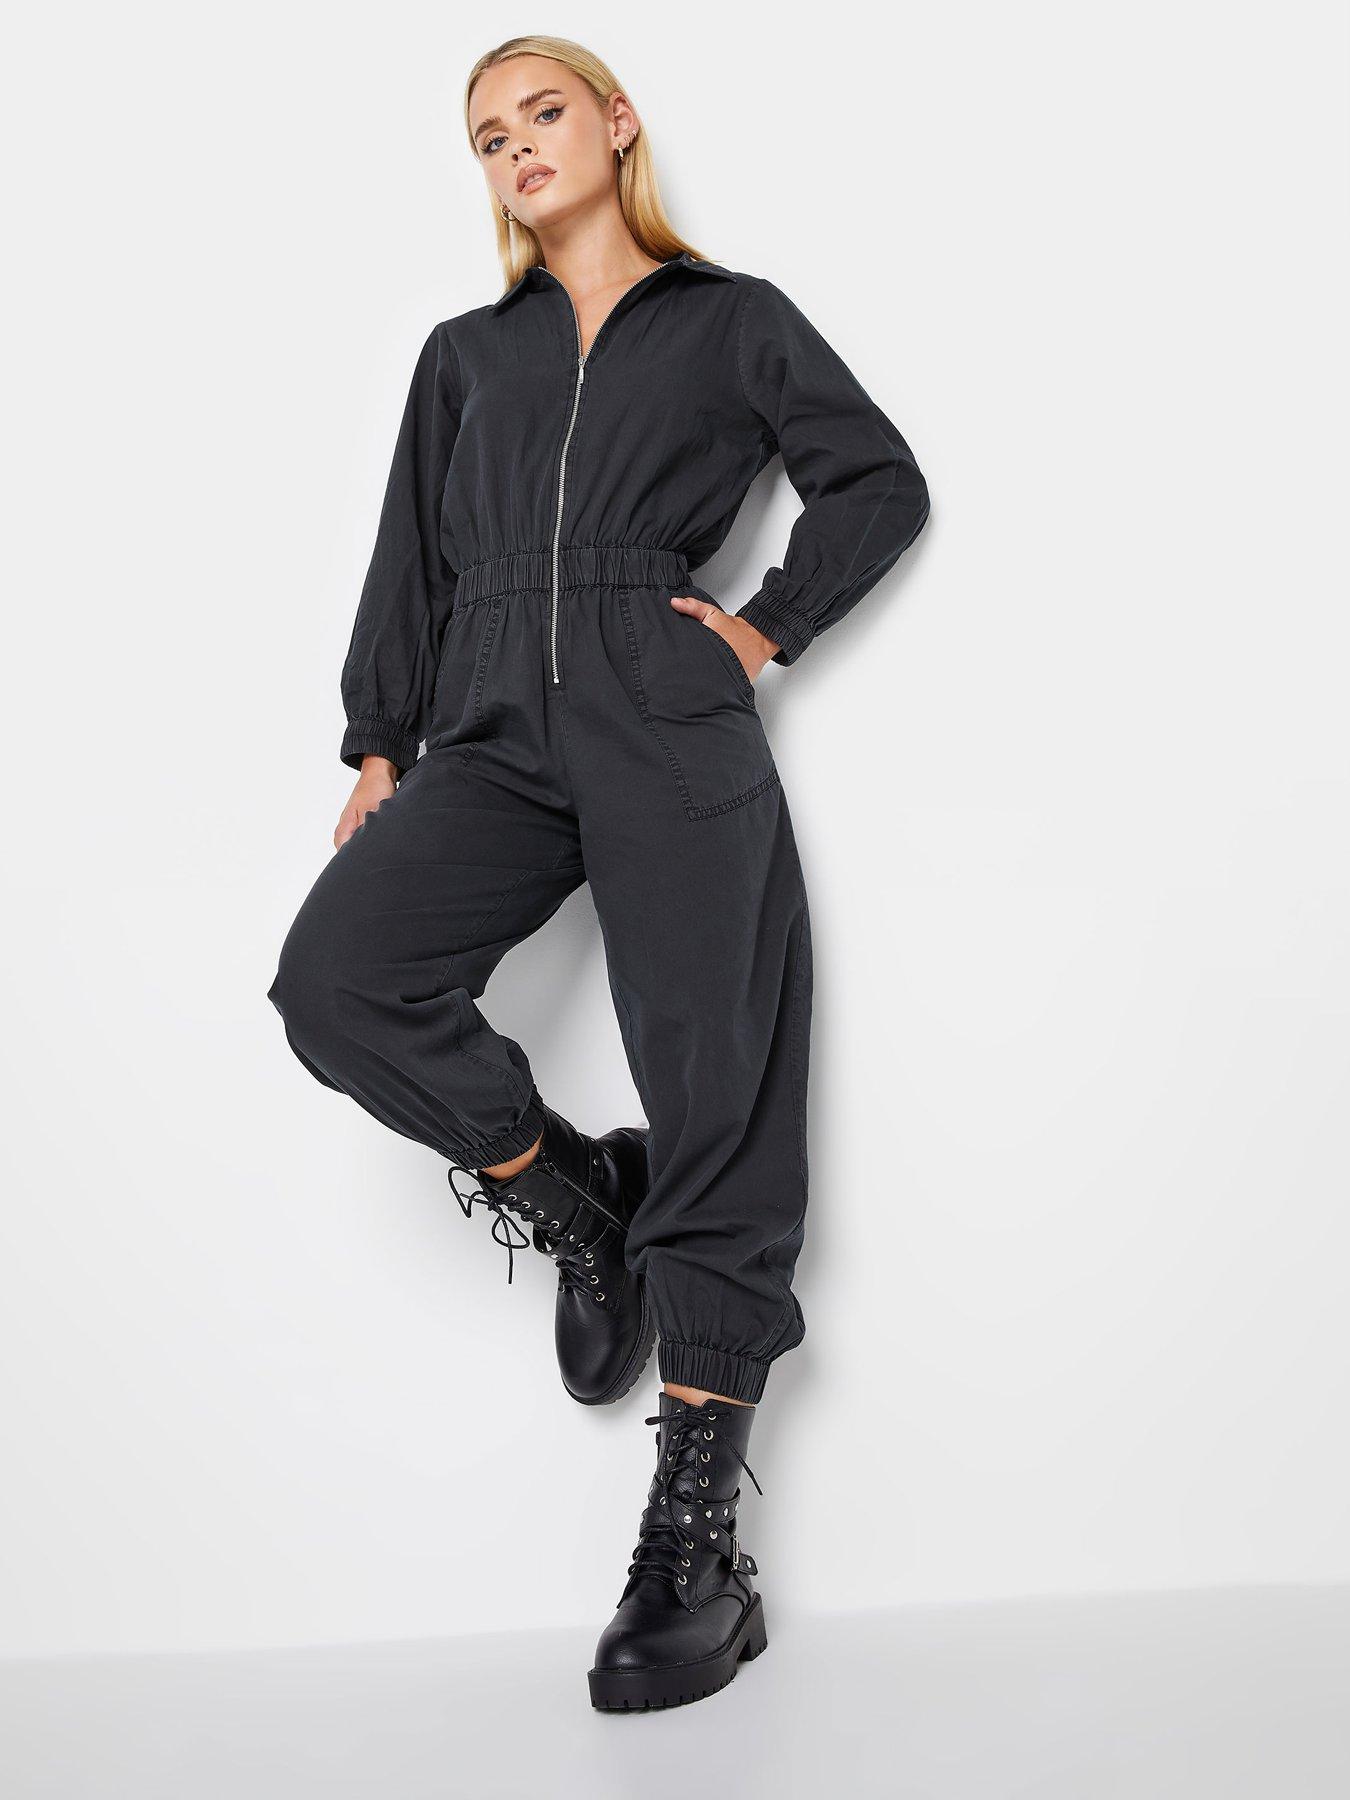 Share more than 189 party jumpsuits petite super hot